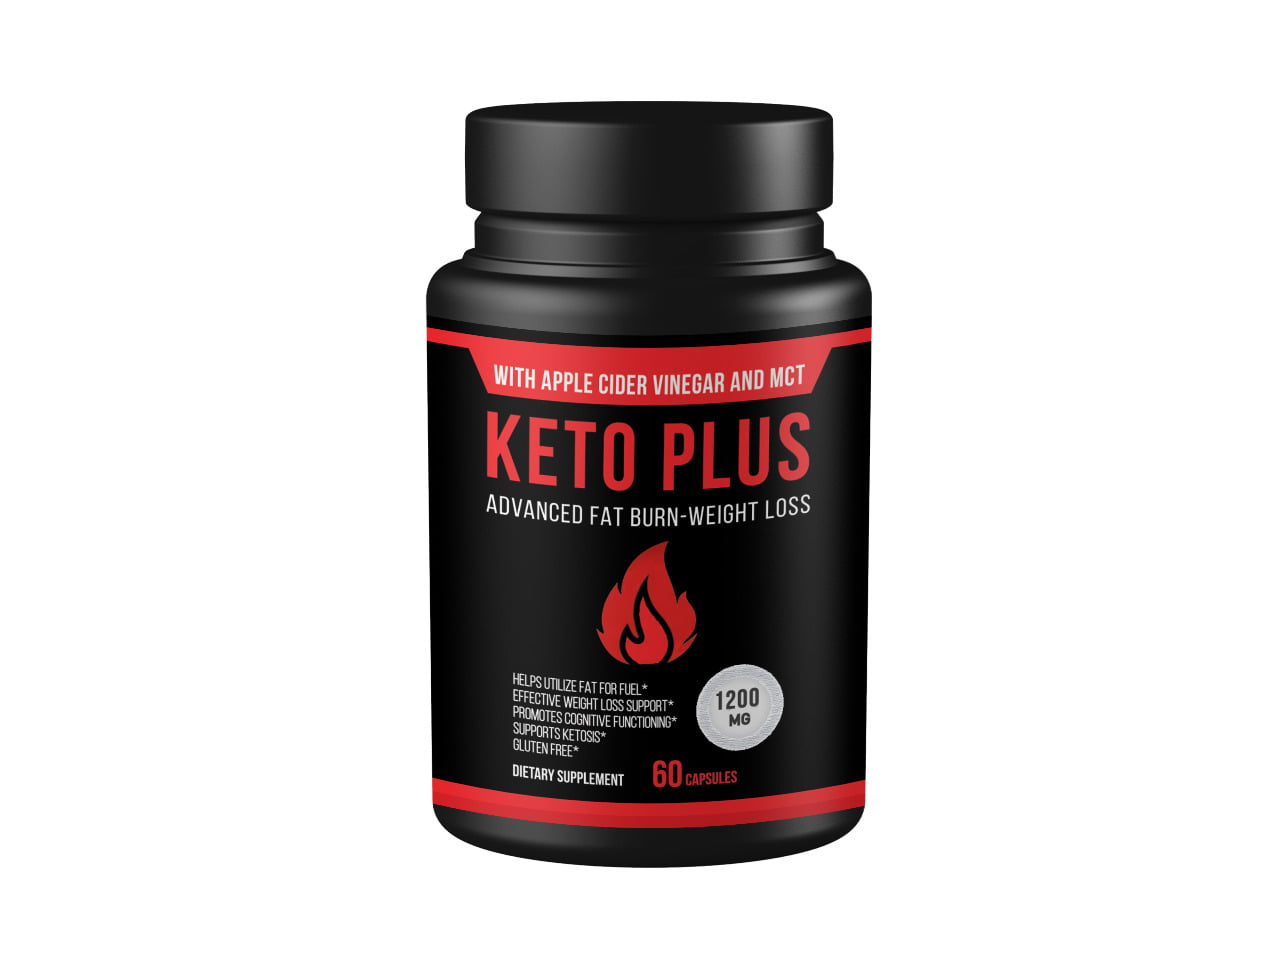 Keto Diet Pills 1200mg + Apple Cider Vinegar- Best Weight Management Keto BHB Supplement for Women and Men - Boost Energy &amp; Focus, Support Metabolism + MCT Oil - Made in USA - 60 Capsules